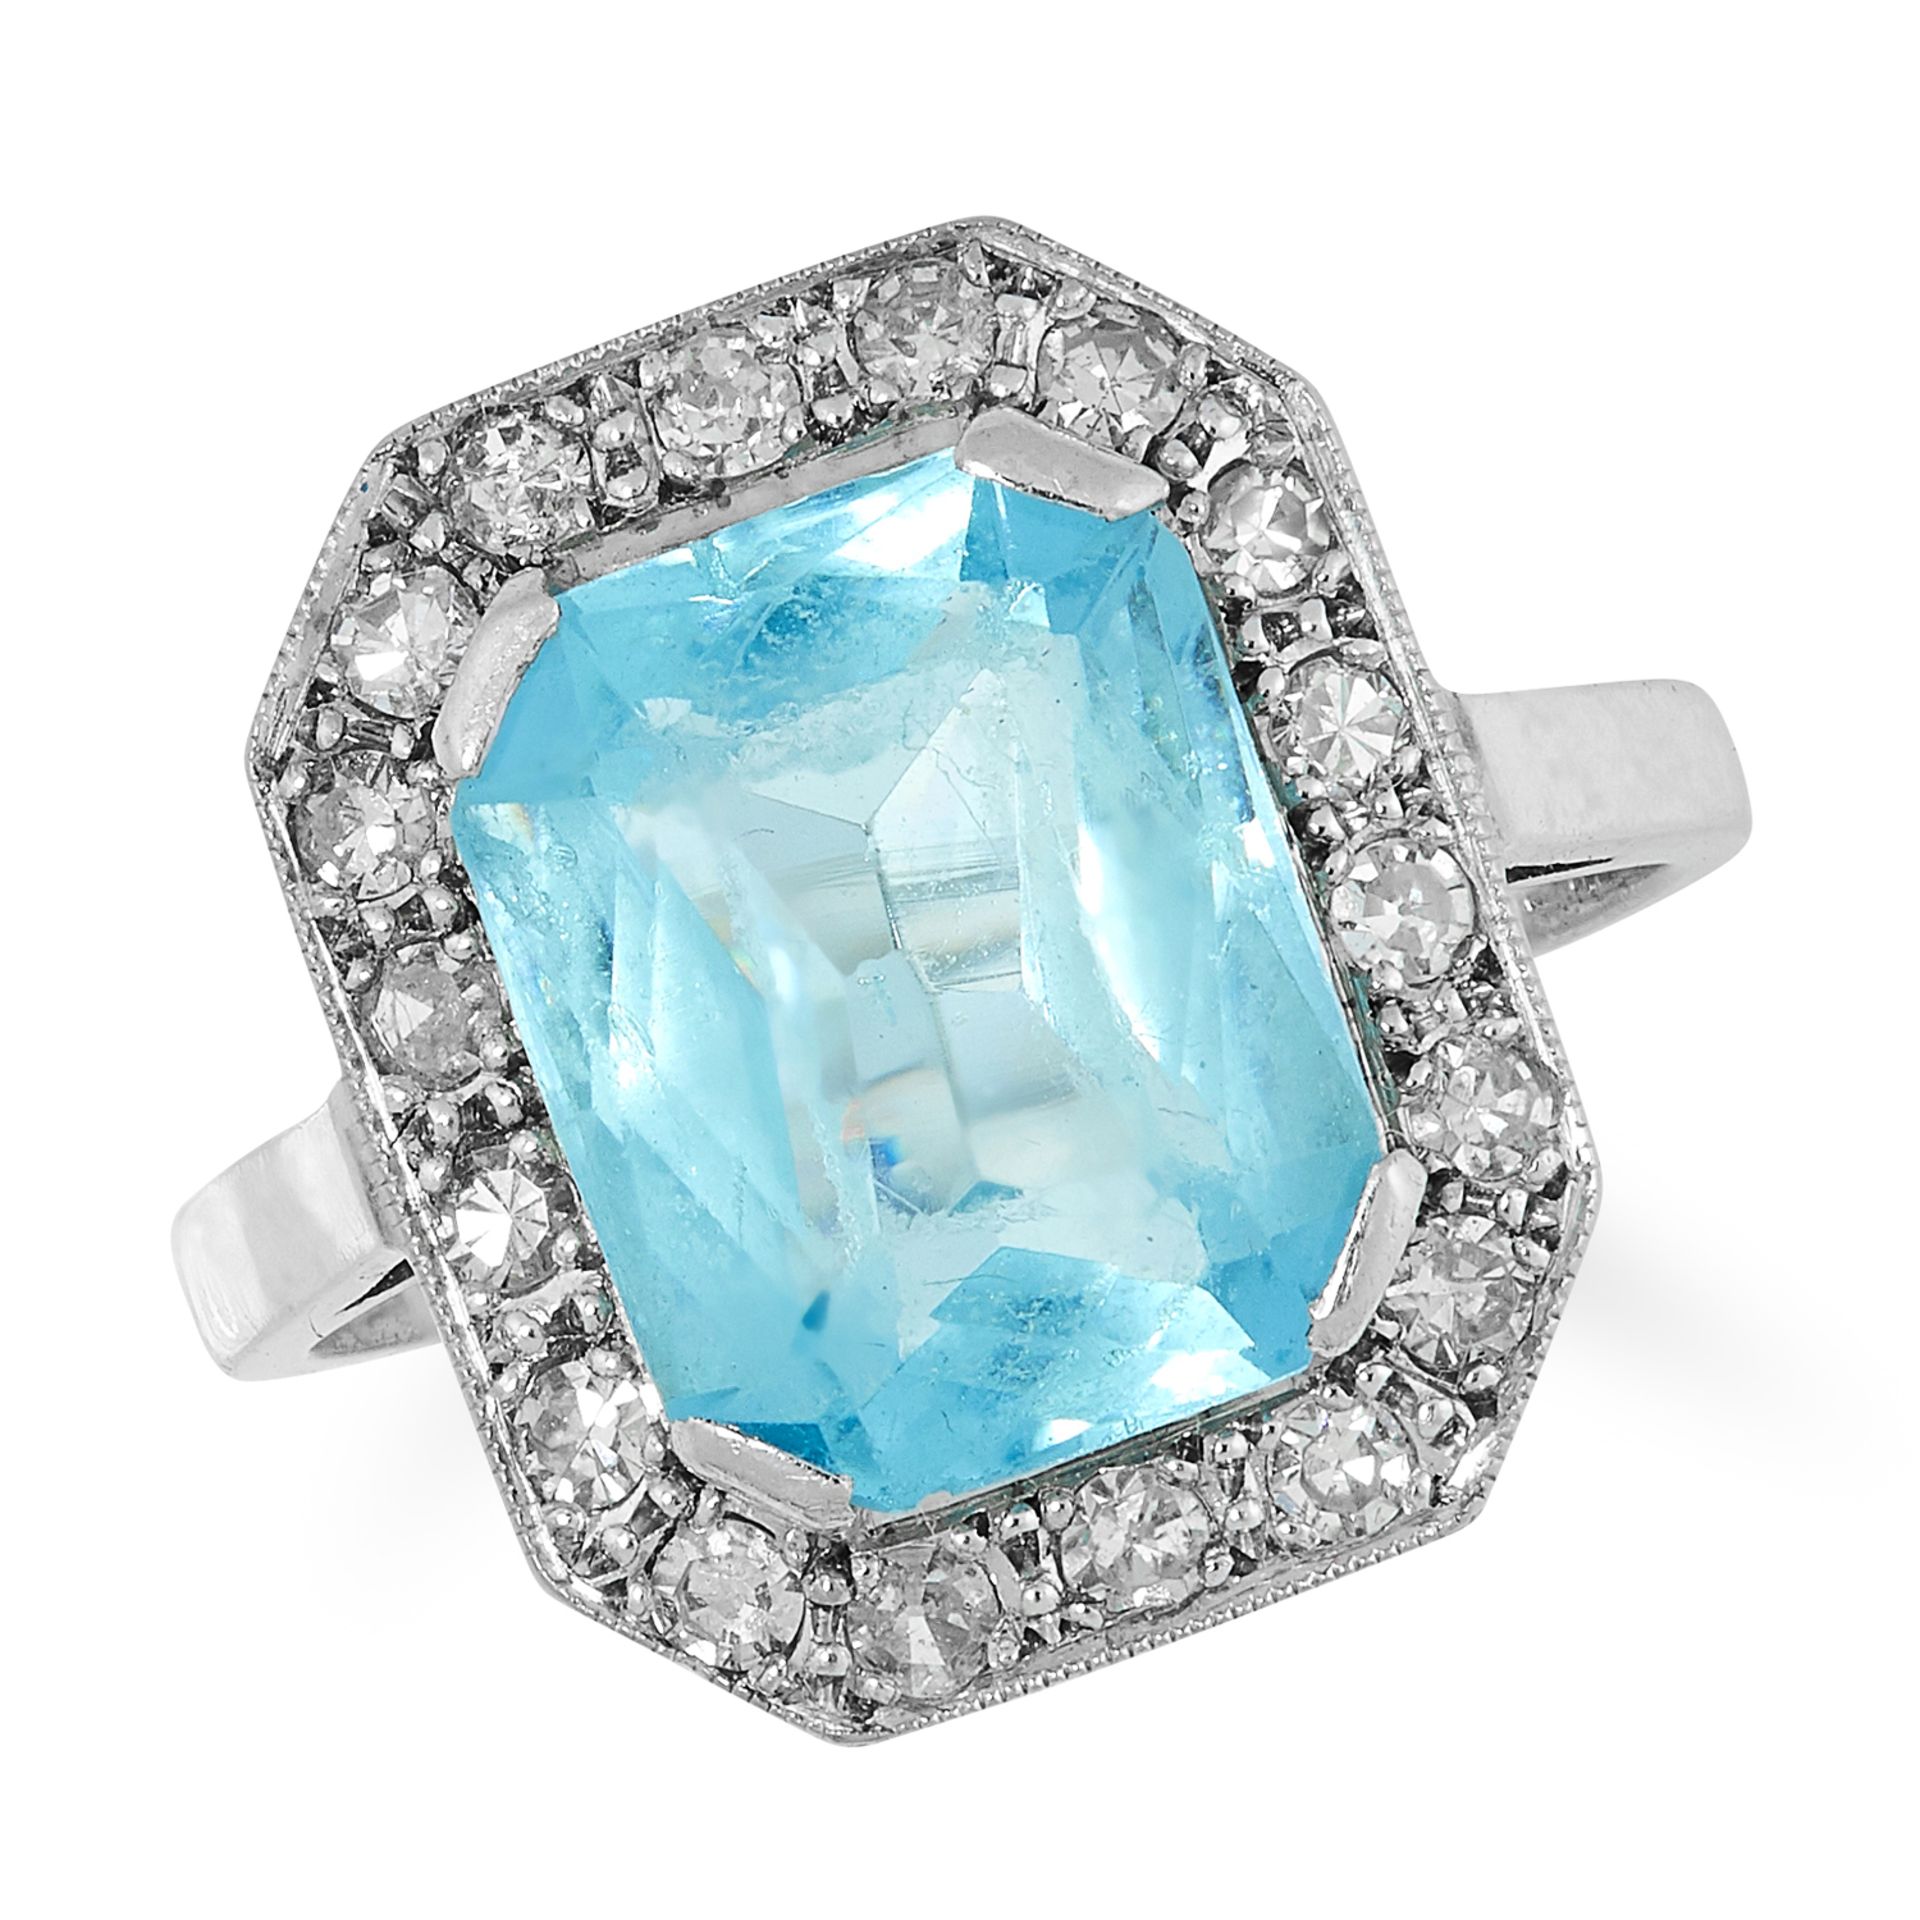 A BLUE TOPAZ AND DIAMOND CLUSTER RING set with a mixed cut blue topaz in a border of round brilliant